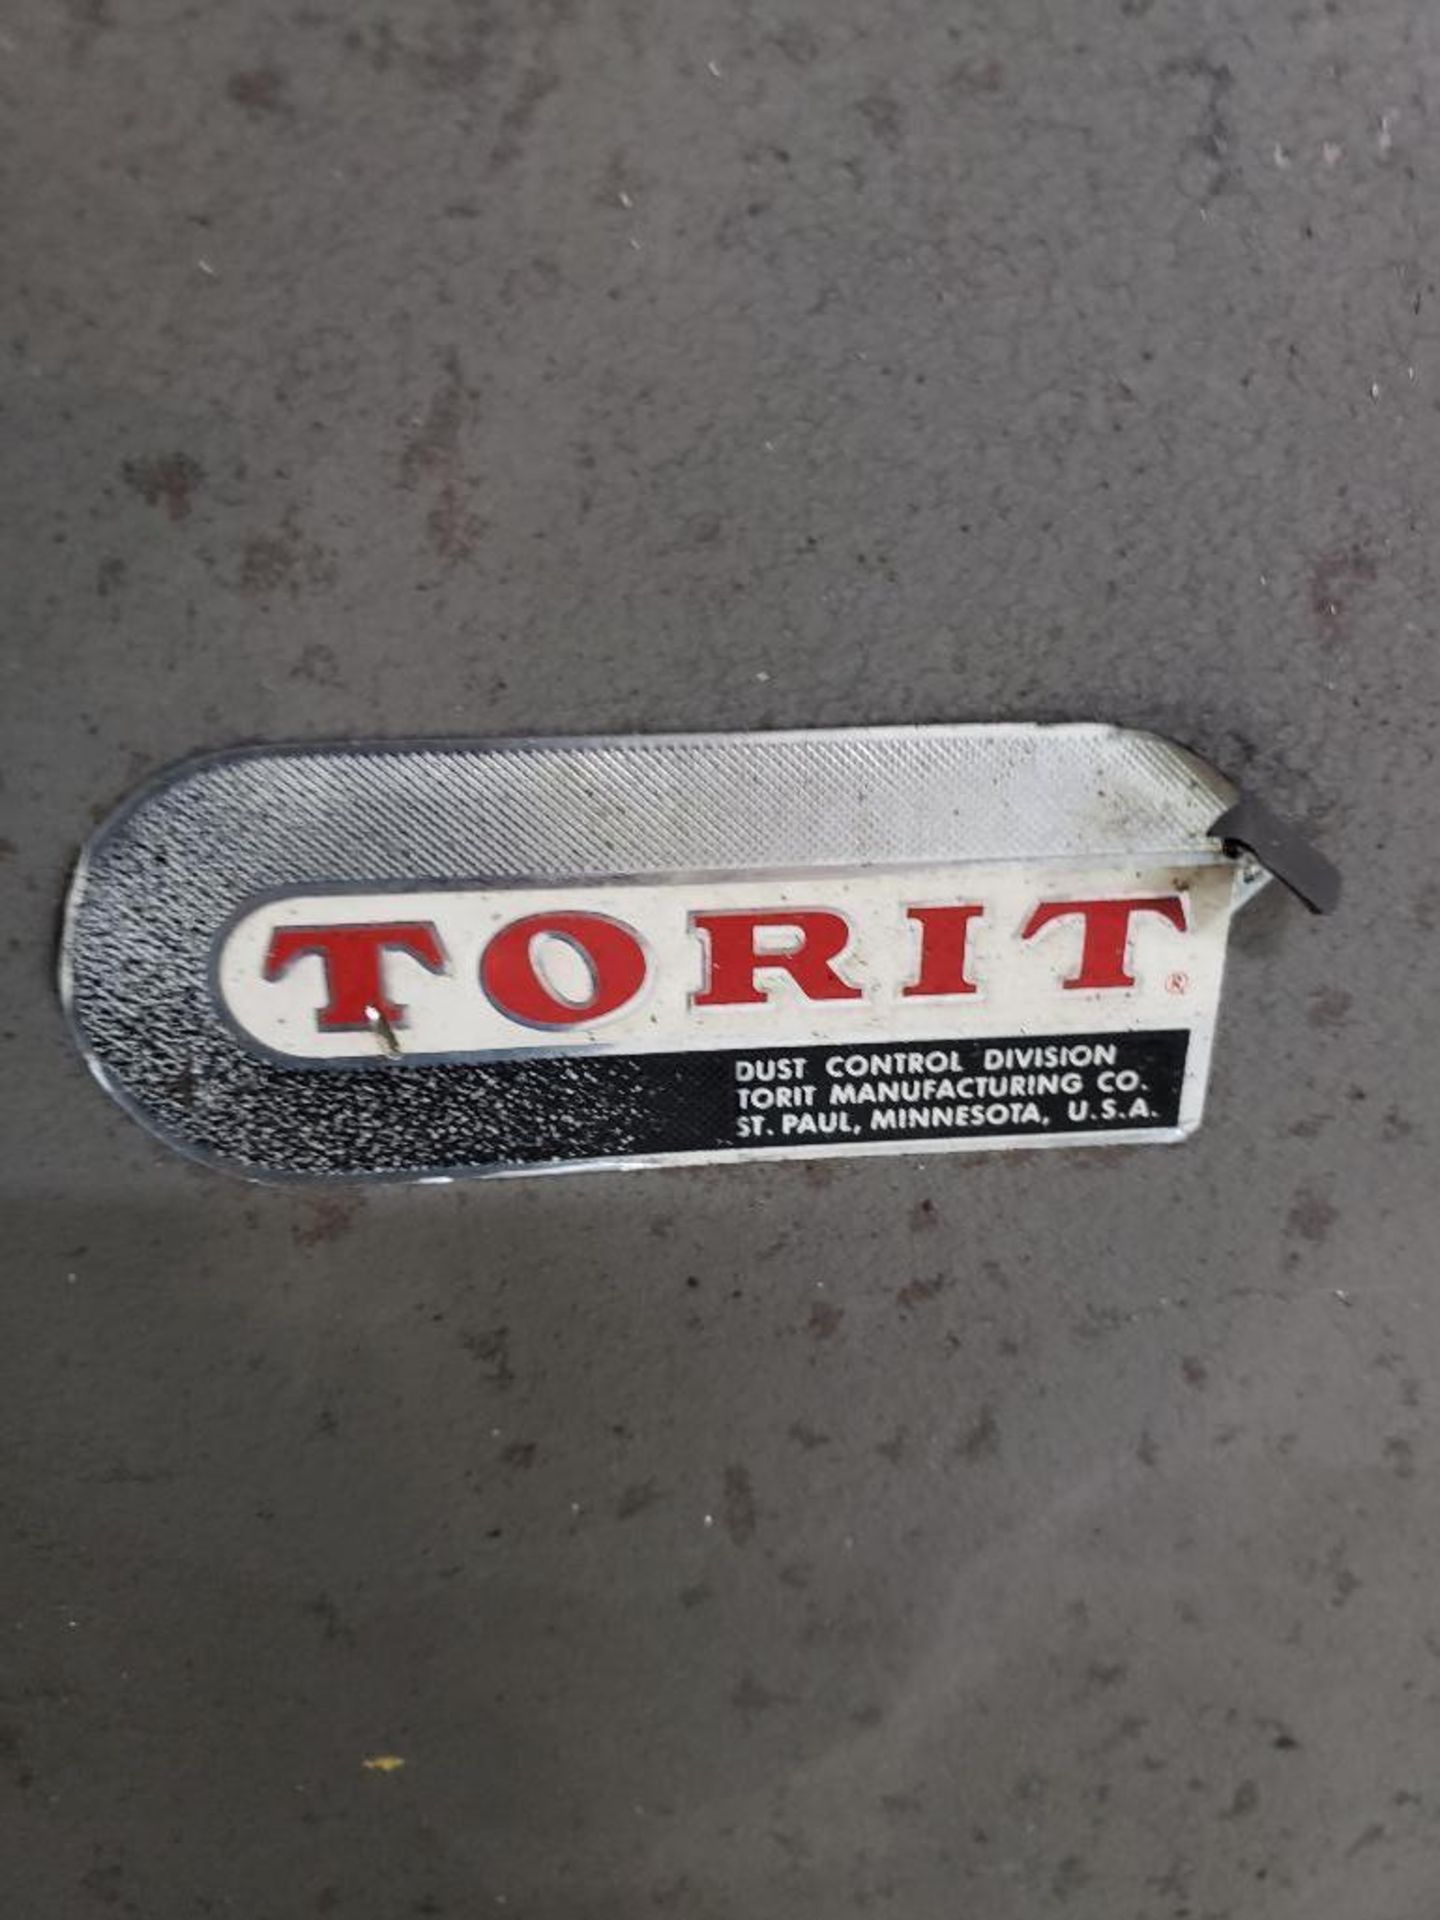 Torit dust collector. - Image 6 of 8